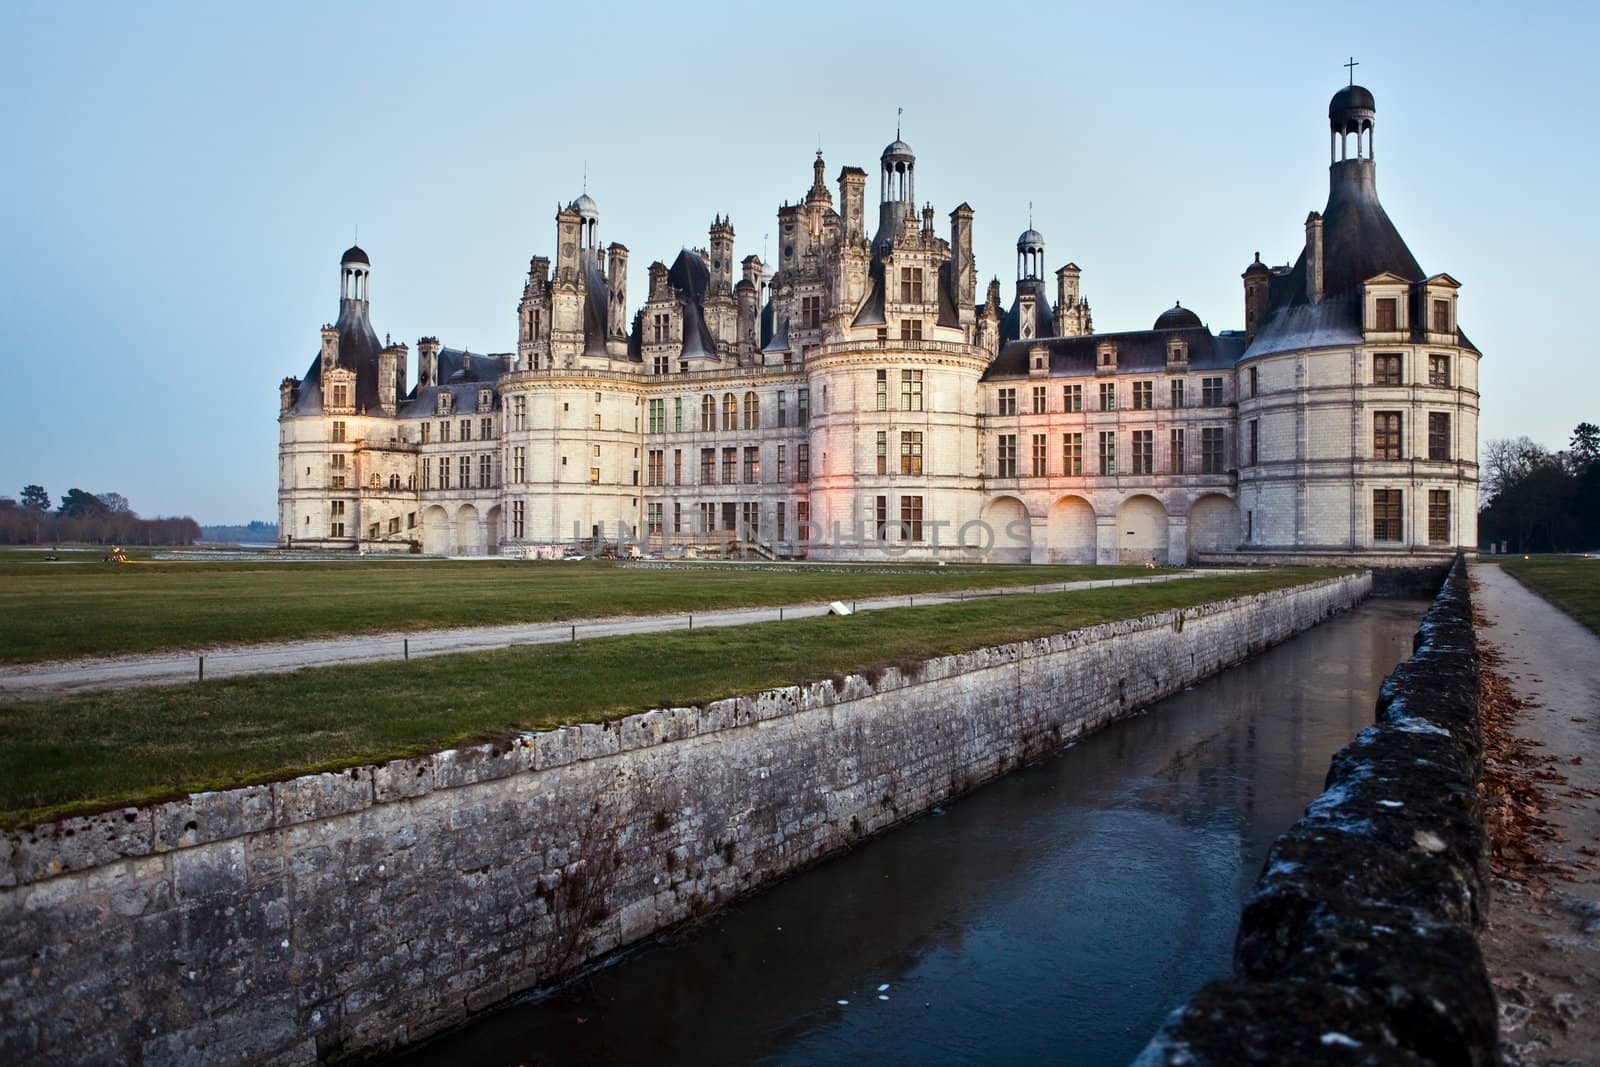 The picture is made in Castle Chambord during travel across France